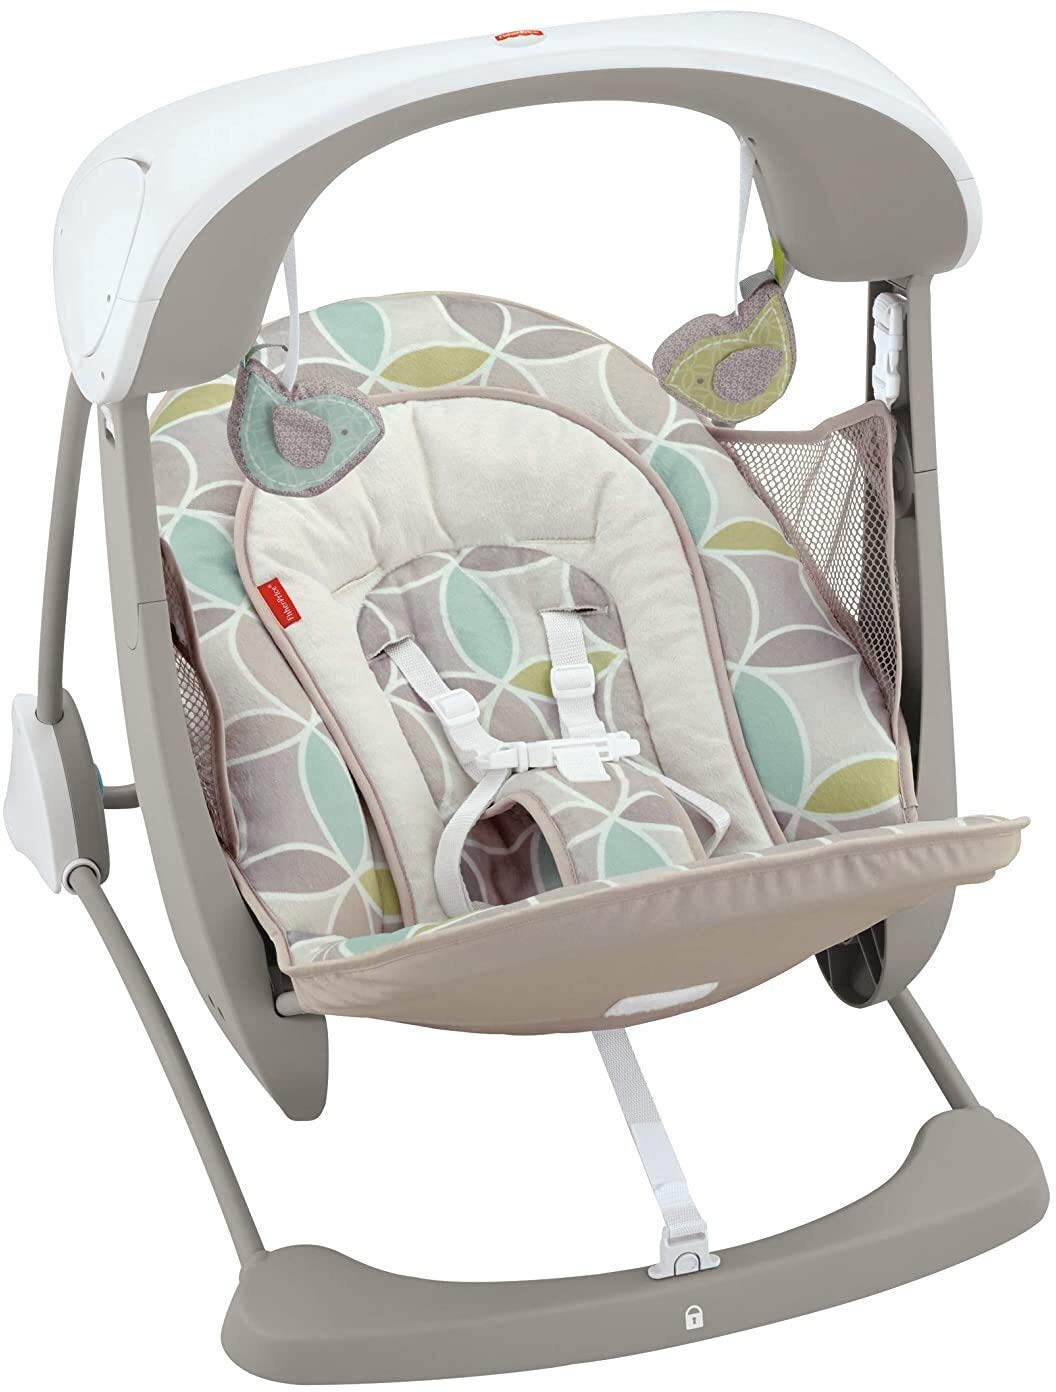 Fisher-Price Deluxe Take-Along Swing & Seat - Earlyyears ecommerce website